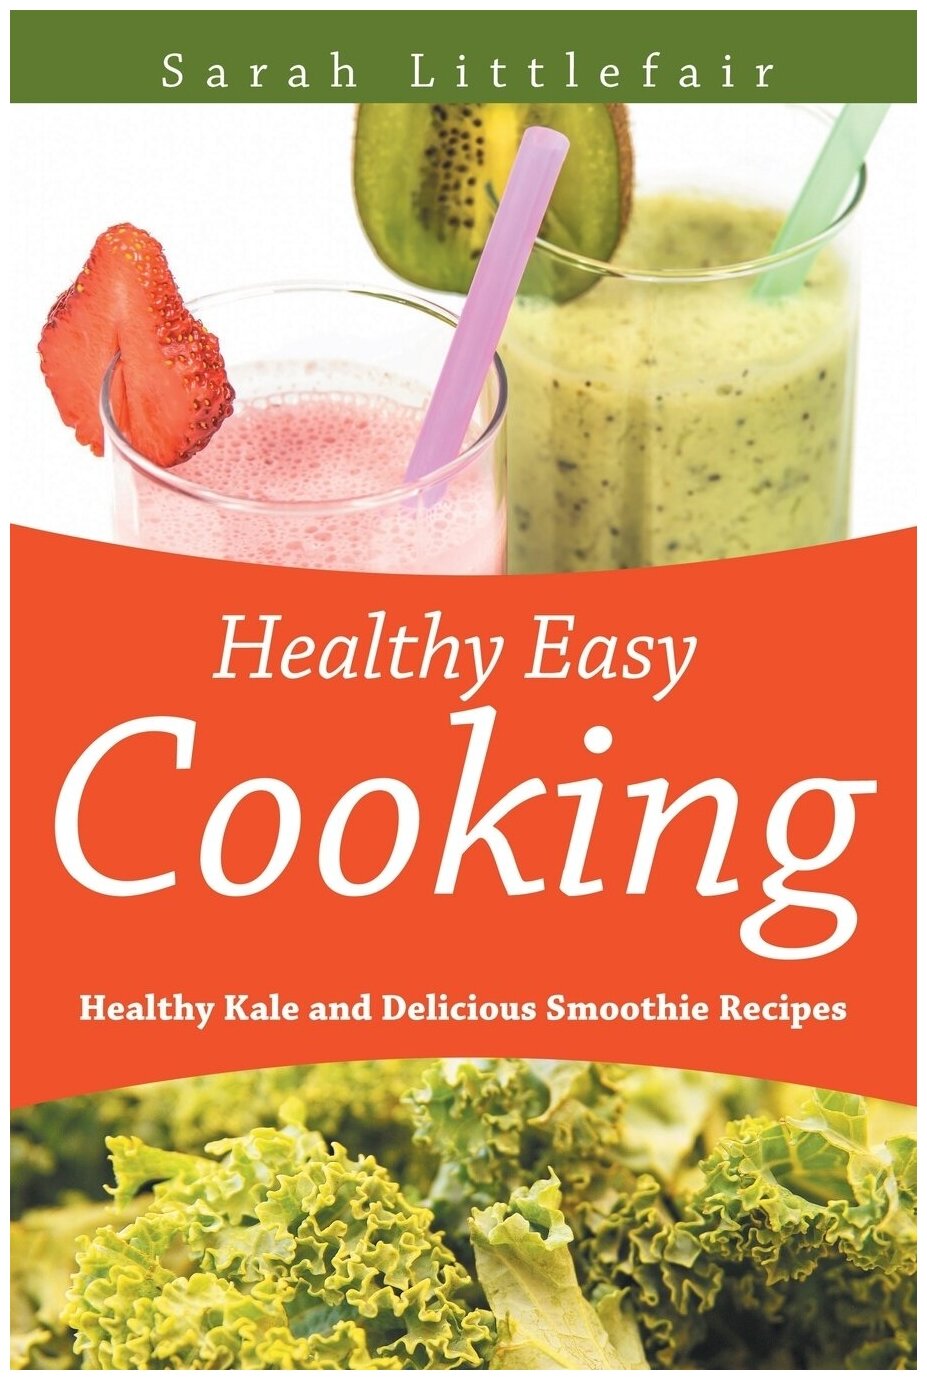 Healthy Easy Cooking. Healthy Kale and Delicious Smoothie Recipes